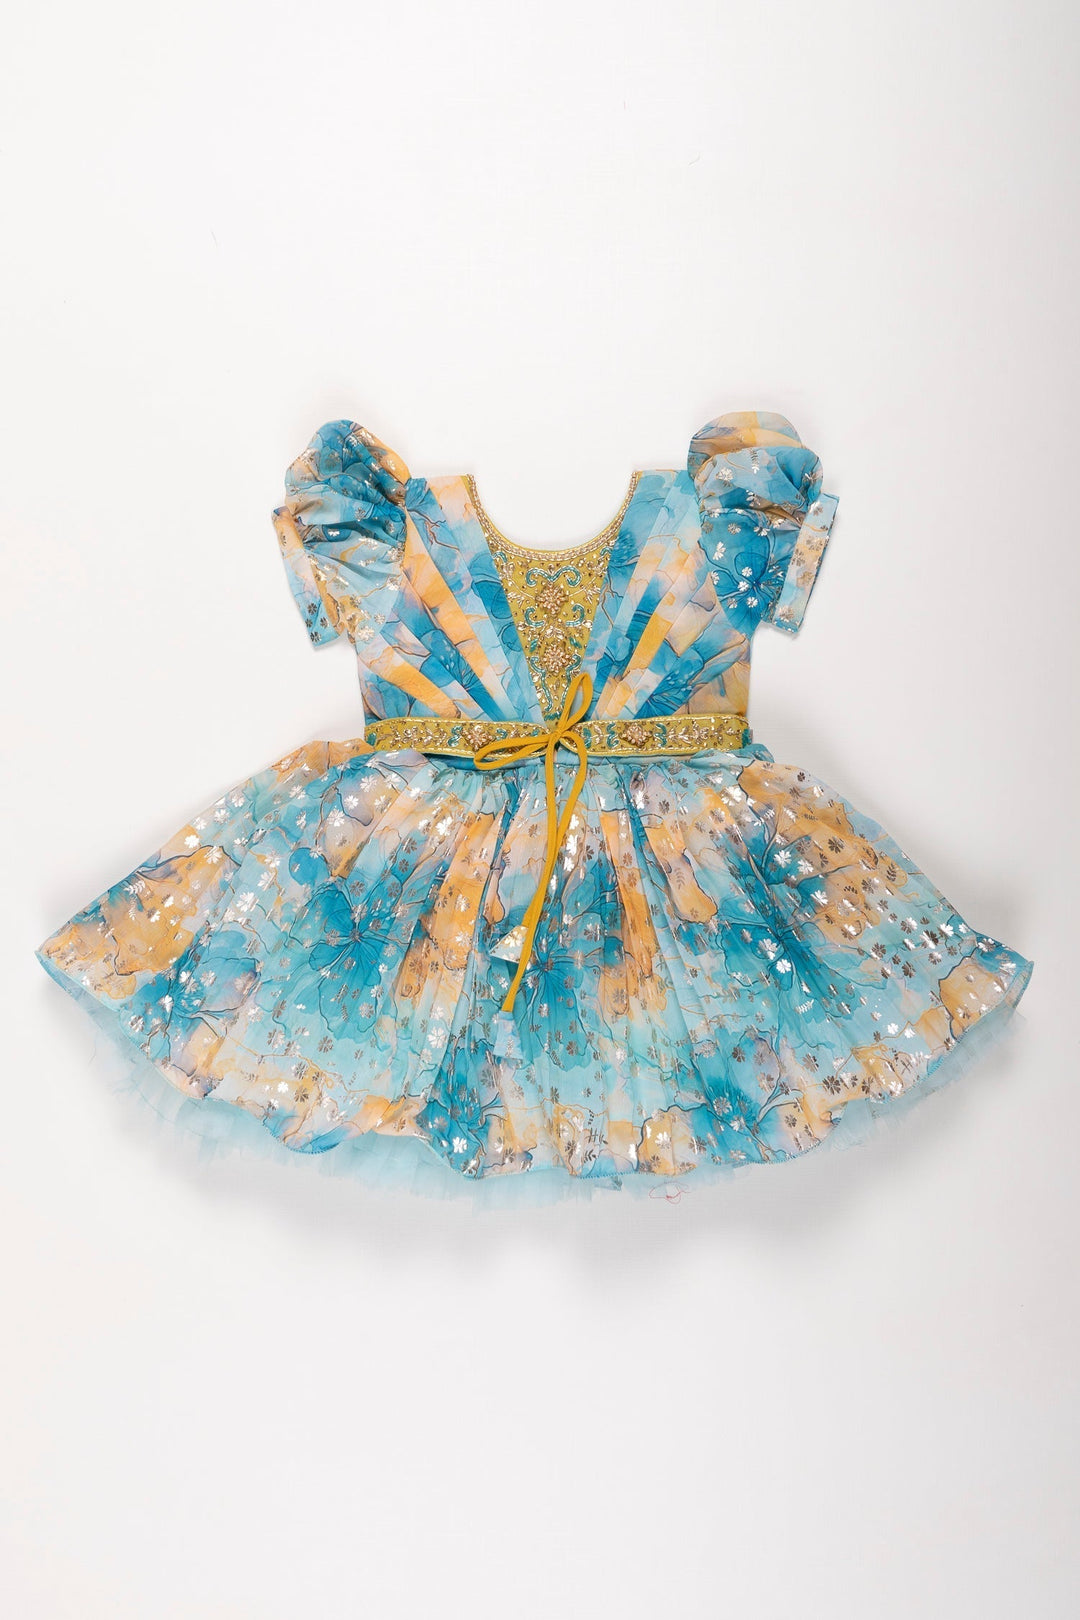 The Nesavu Silk Party Frock Enchanted Garden Silk Party Frock in Blue and Yellow Nesavu 18 (2Y) / Blue / Georgette SF746A-18 Blue & Yellow Floral Silk Frock for Girls | Stone Embroidered Party Dress | The Nesavu